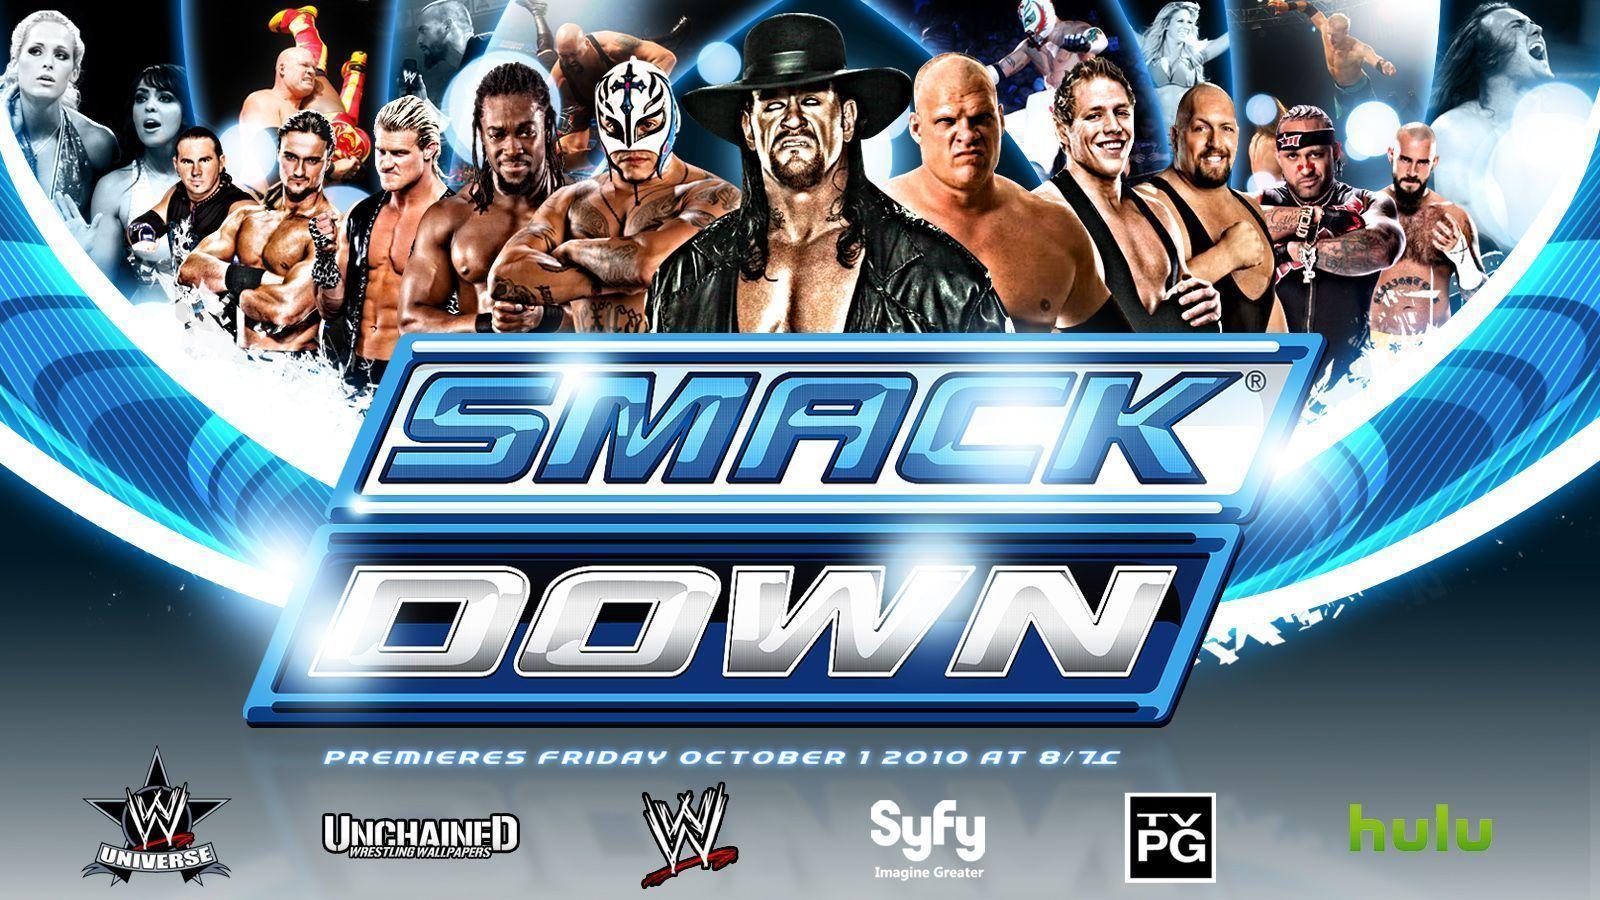 WWE Smackdown Image Hd Download Wallpapers